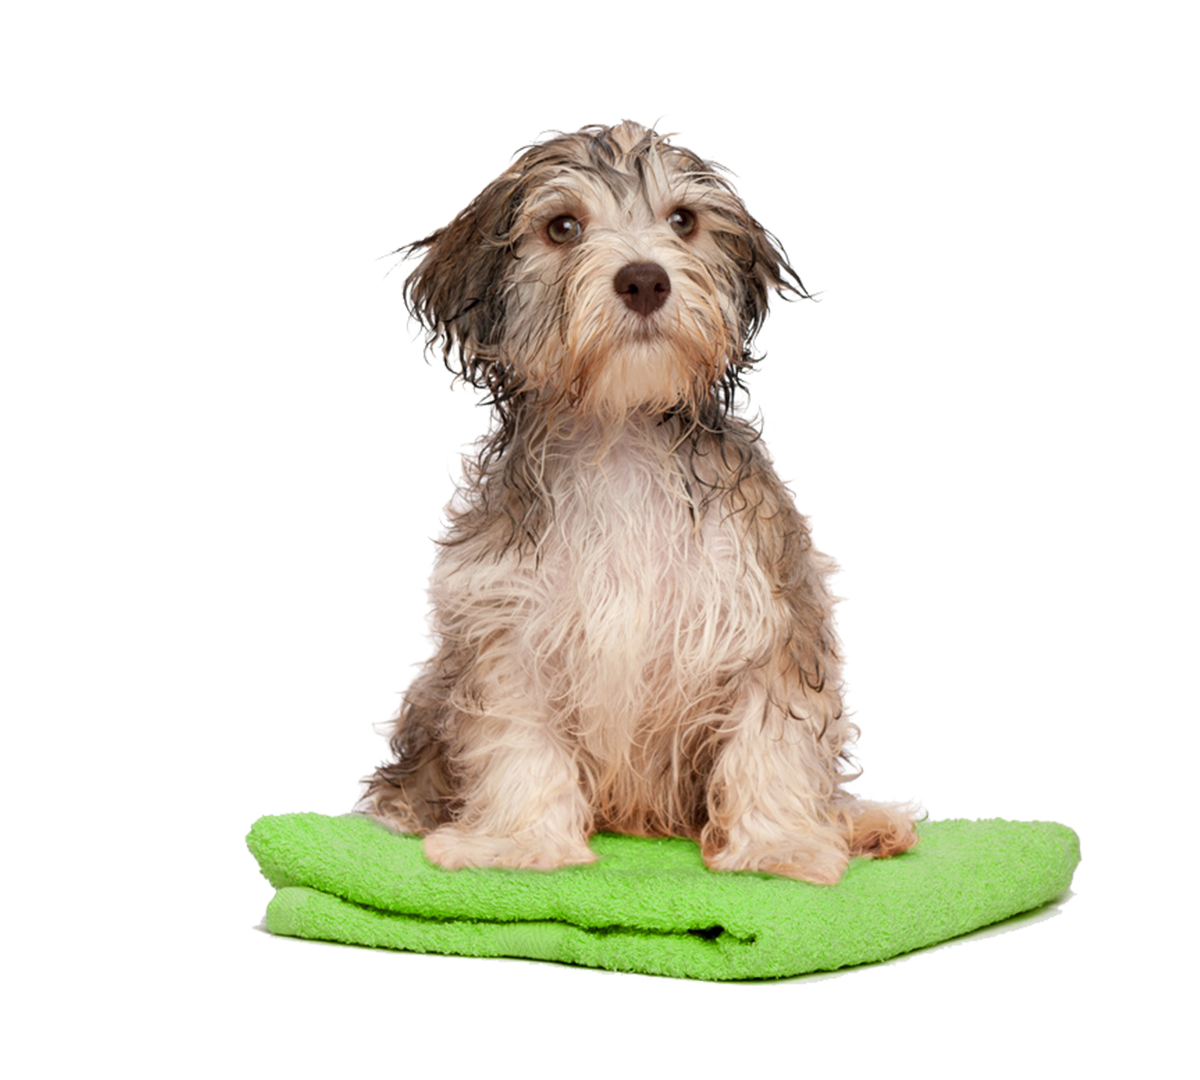 https://pamperedpawssd.com/wp-content/uploads/2020/07/pup-grooming.png